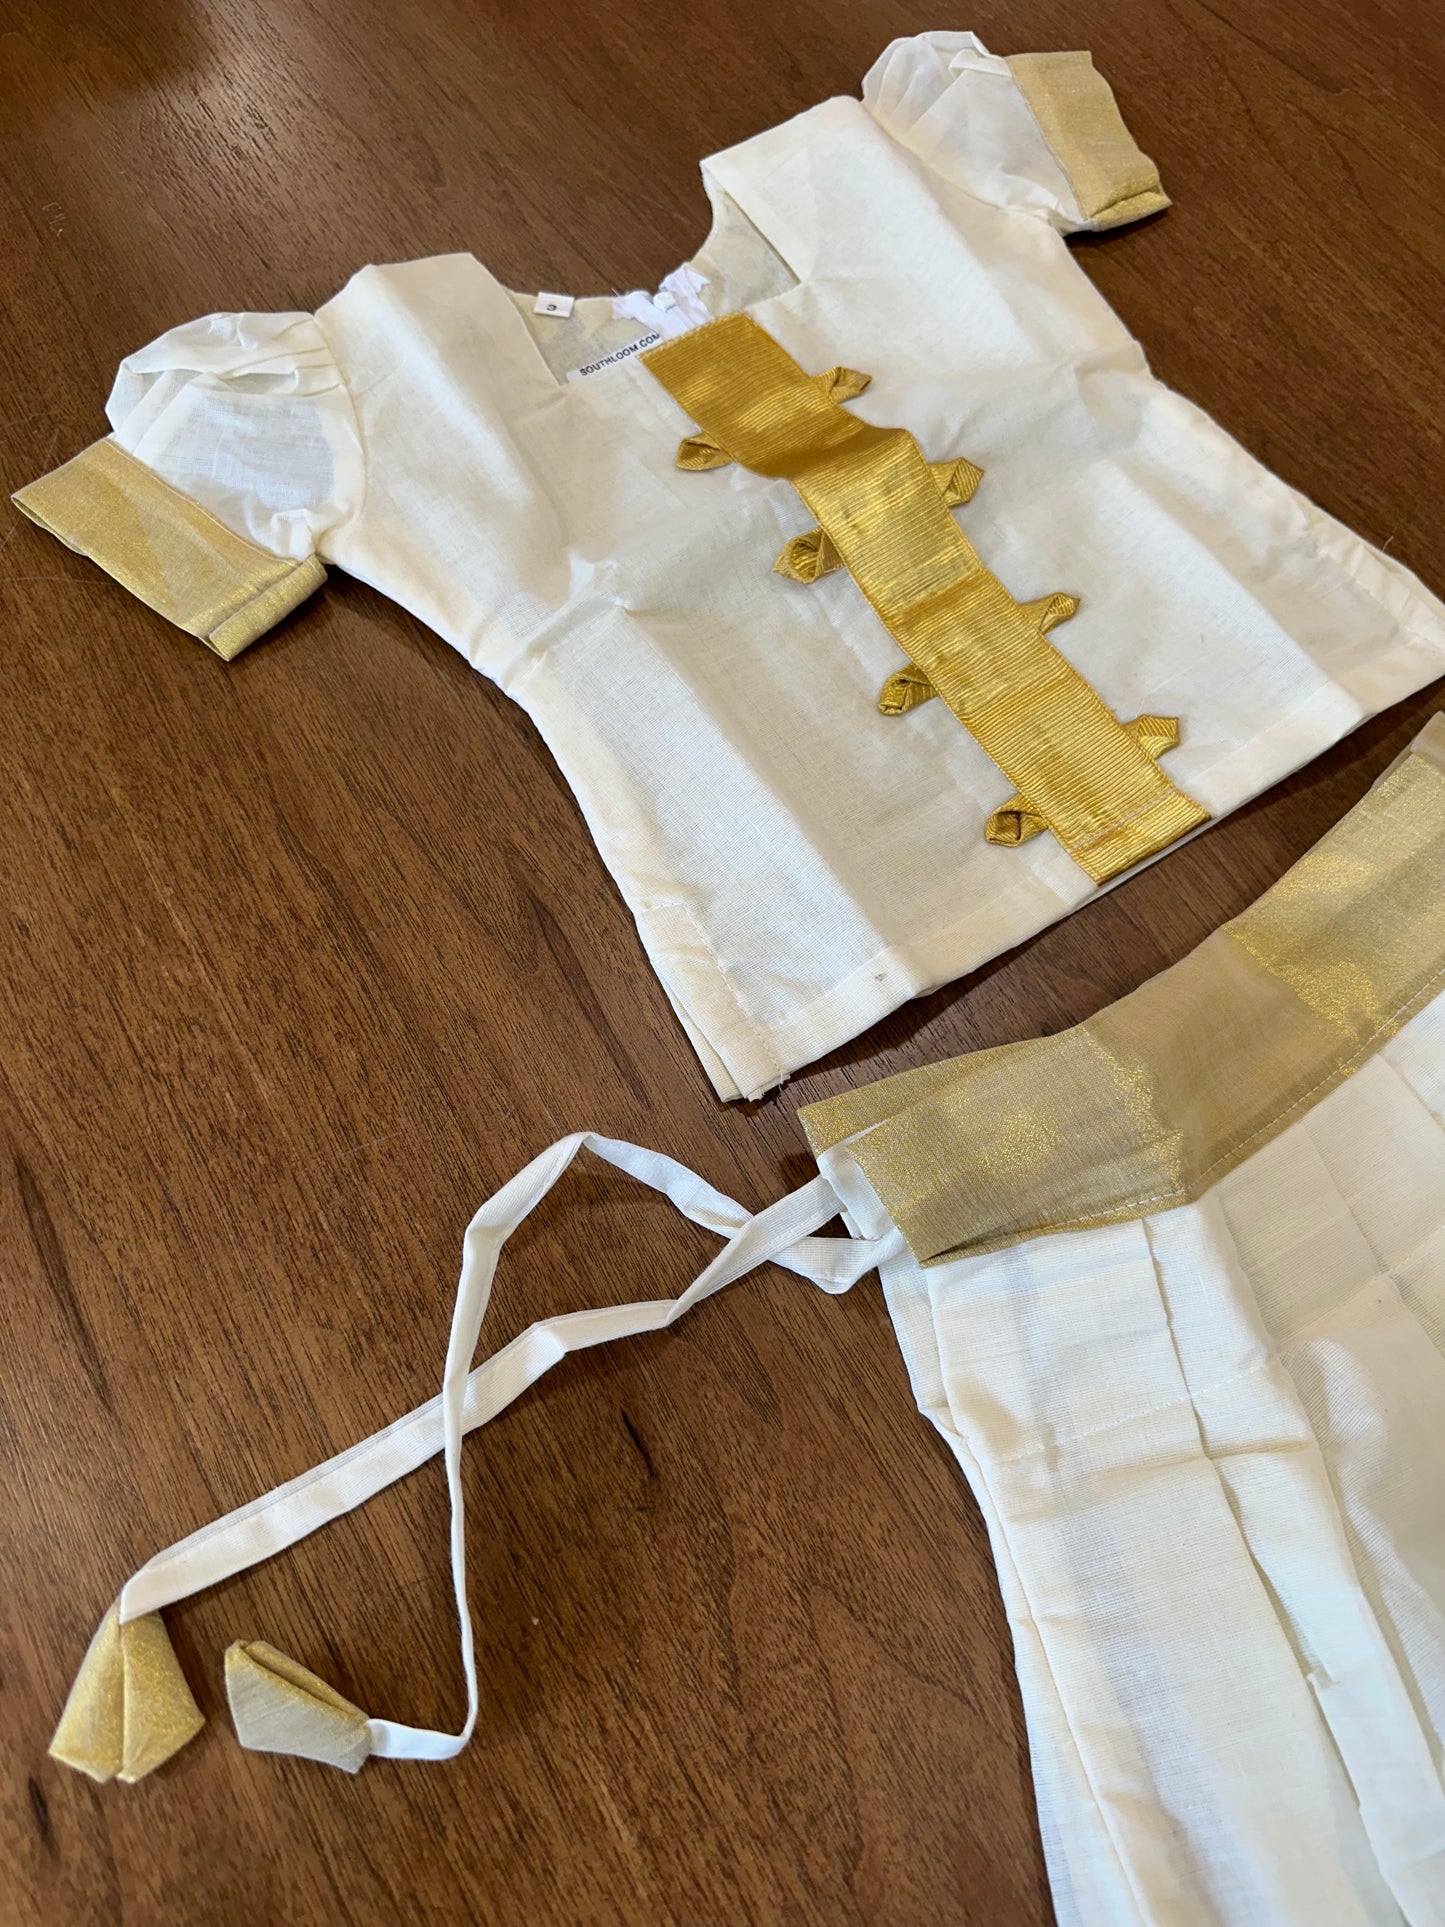 Southloom Off White Kasavu Pavada and Blouse for Kids